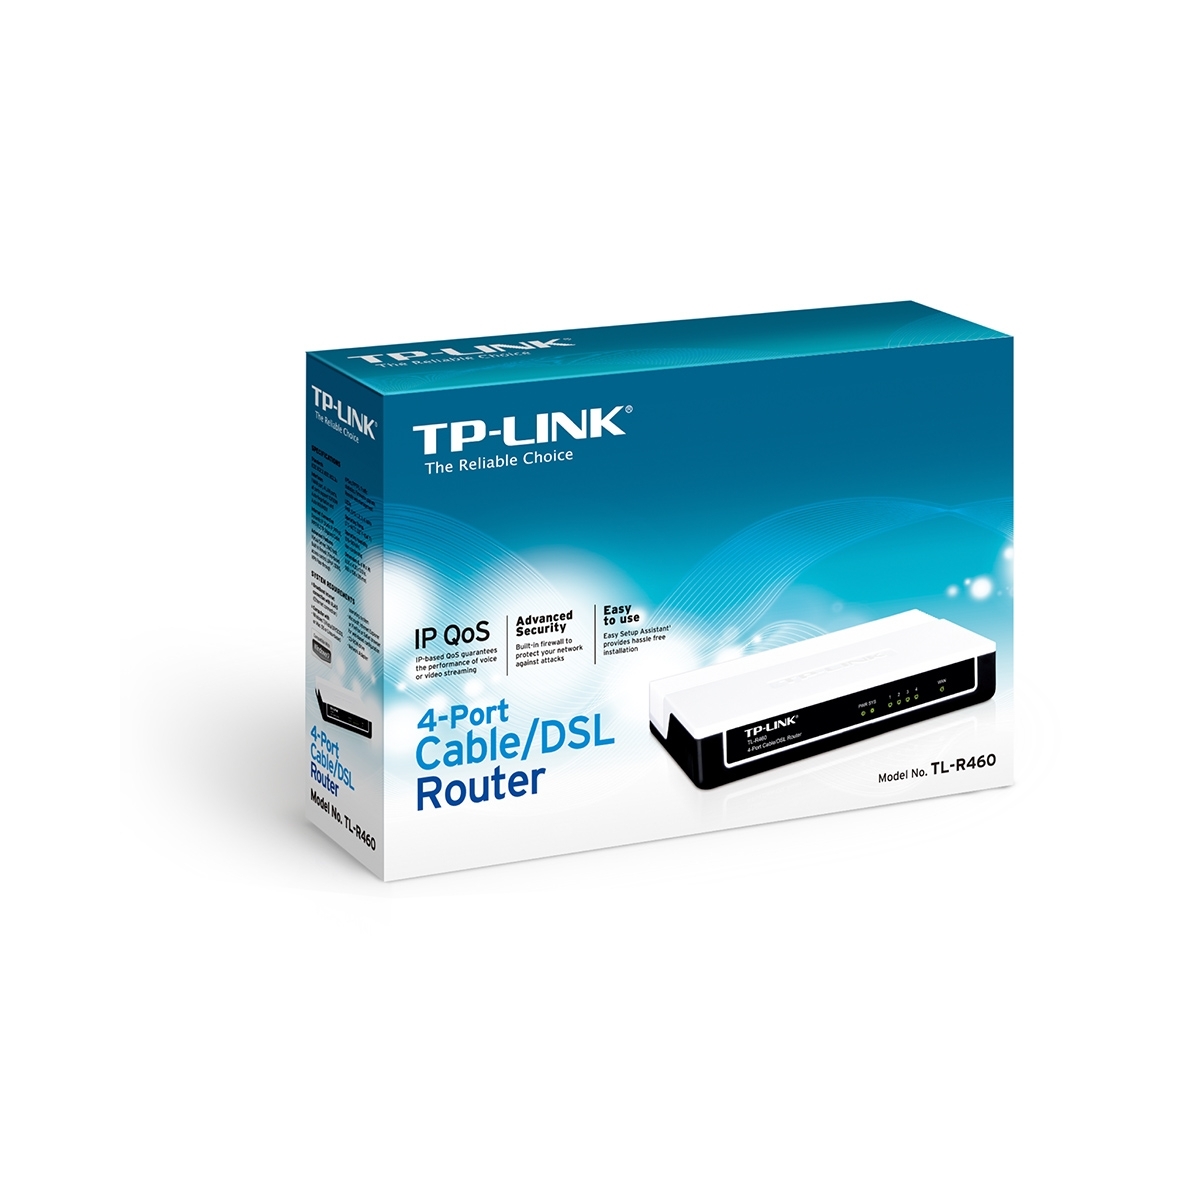 Render blow hole volleyball TPLINK TL-R402M 4Port DSL Router